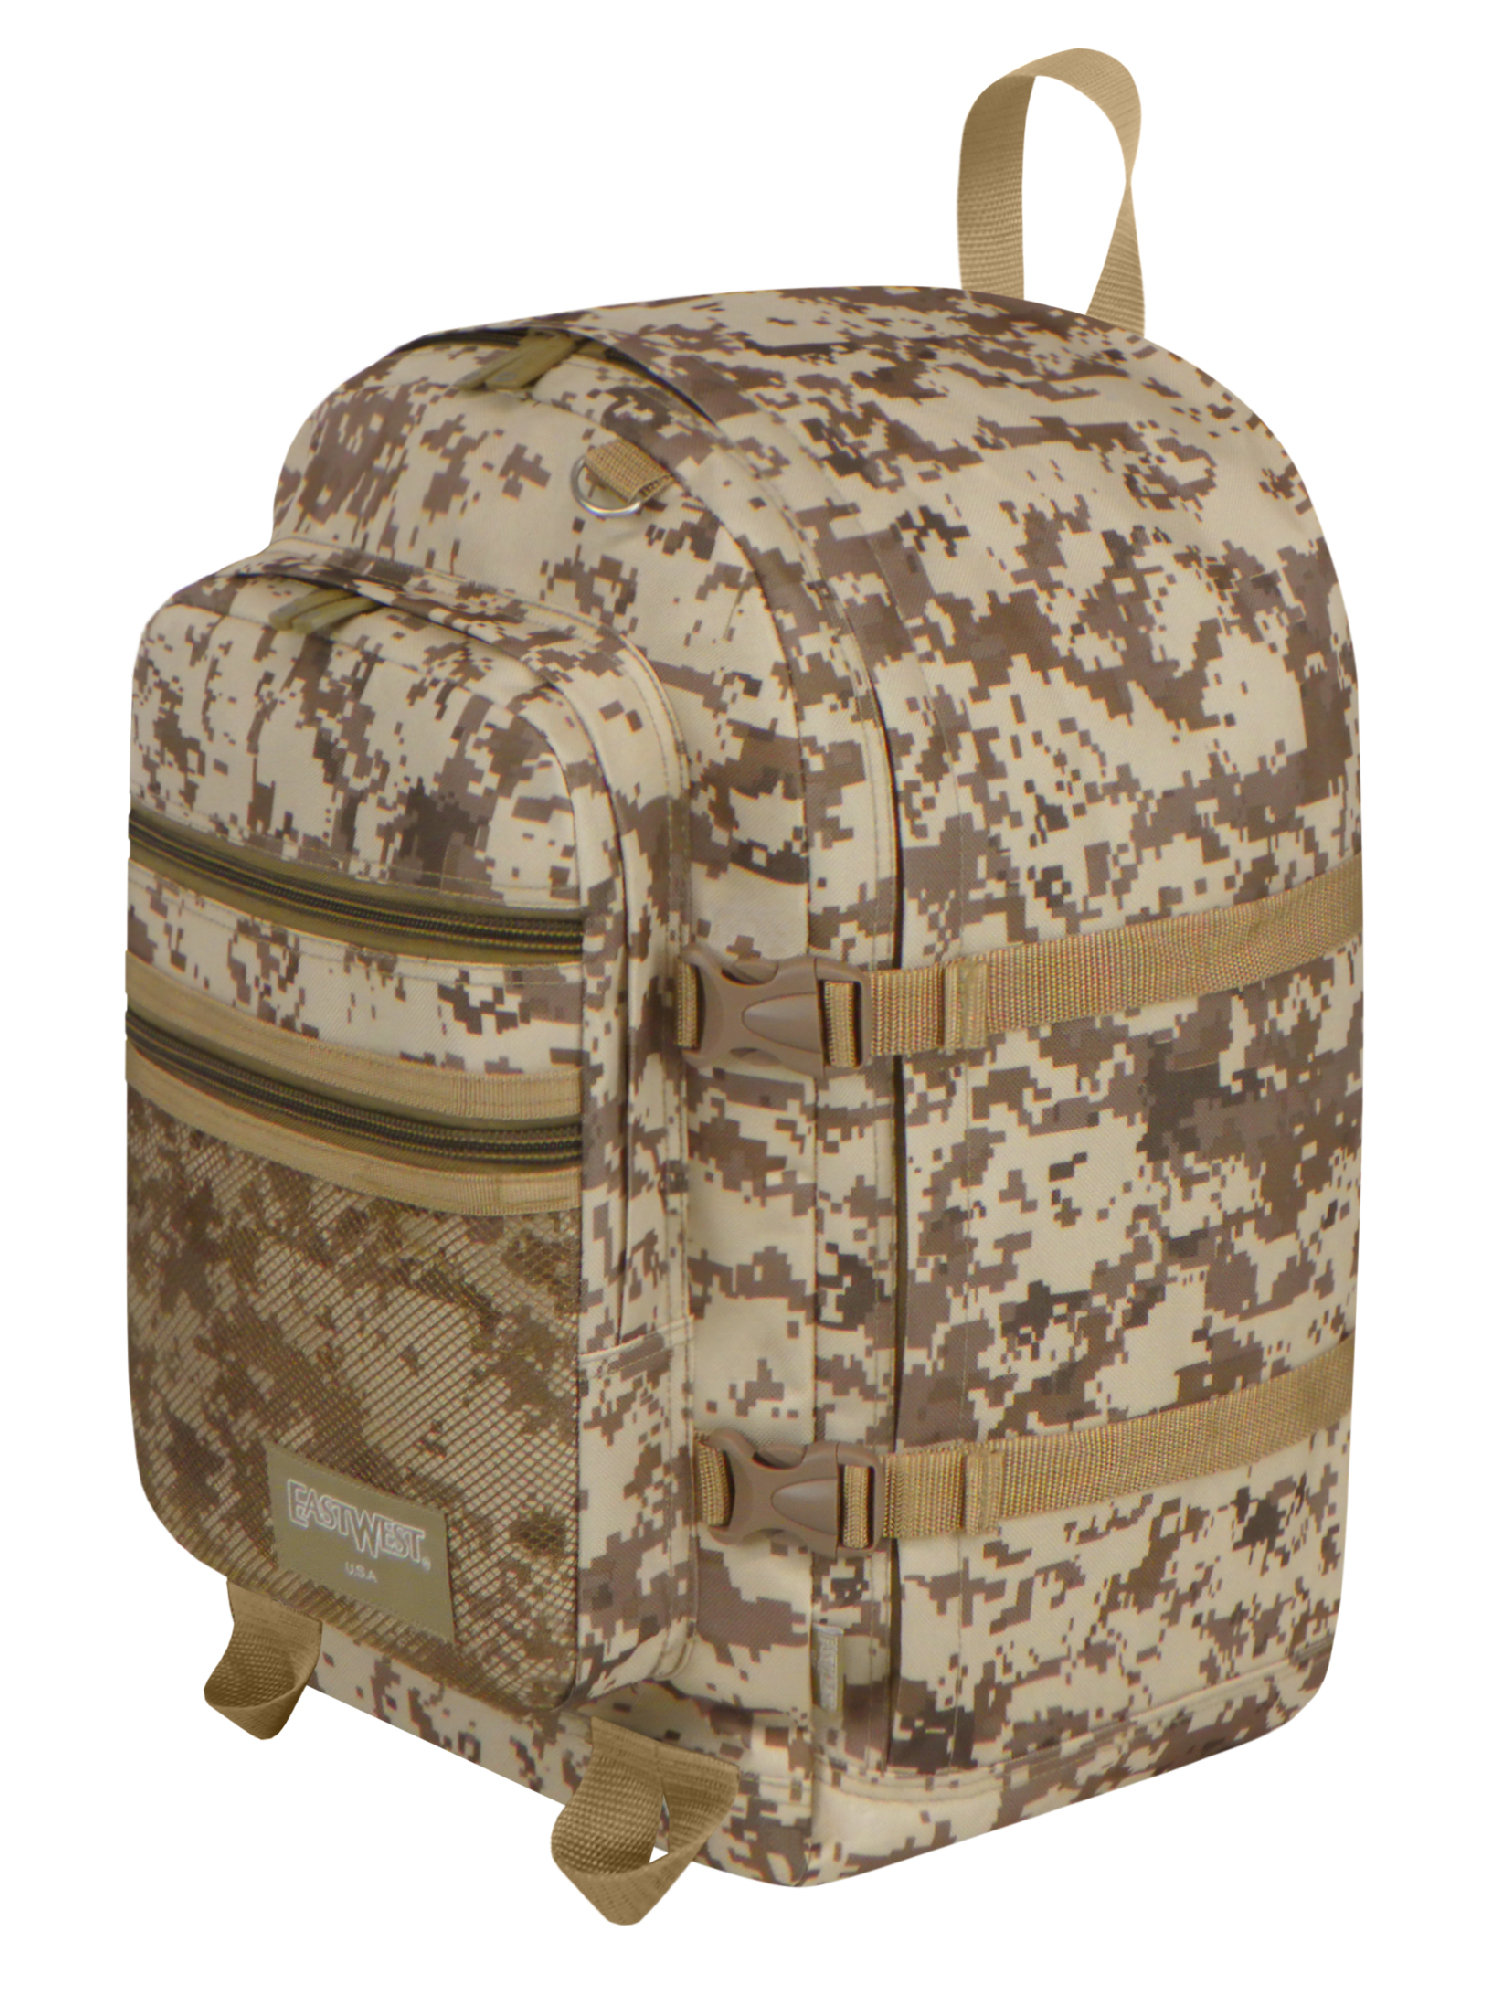 Commuter Camo Backpack - Tan ACU - image 2 of 3